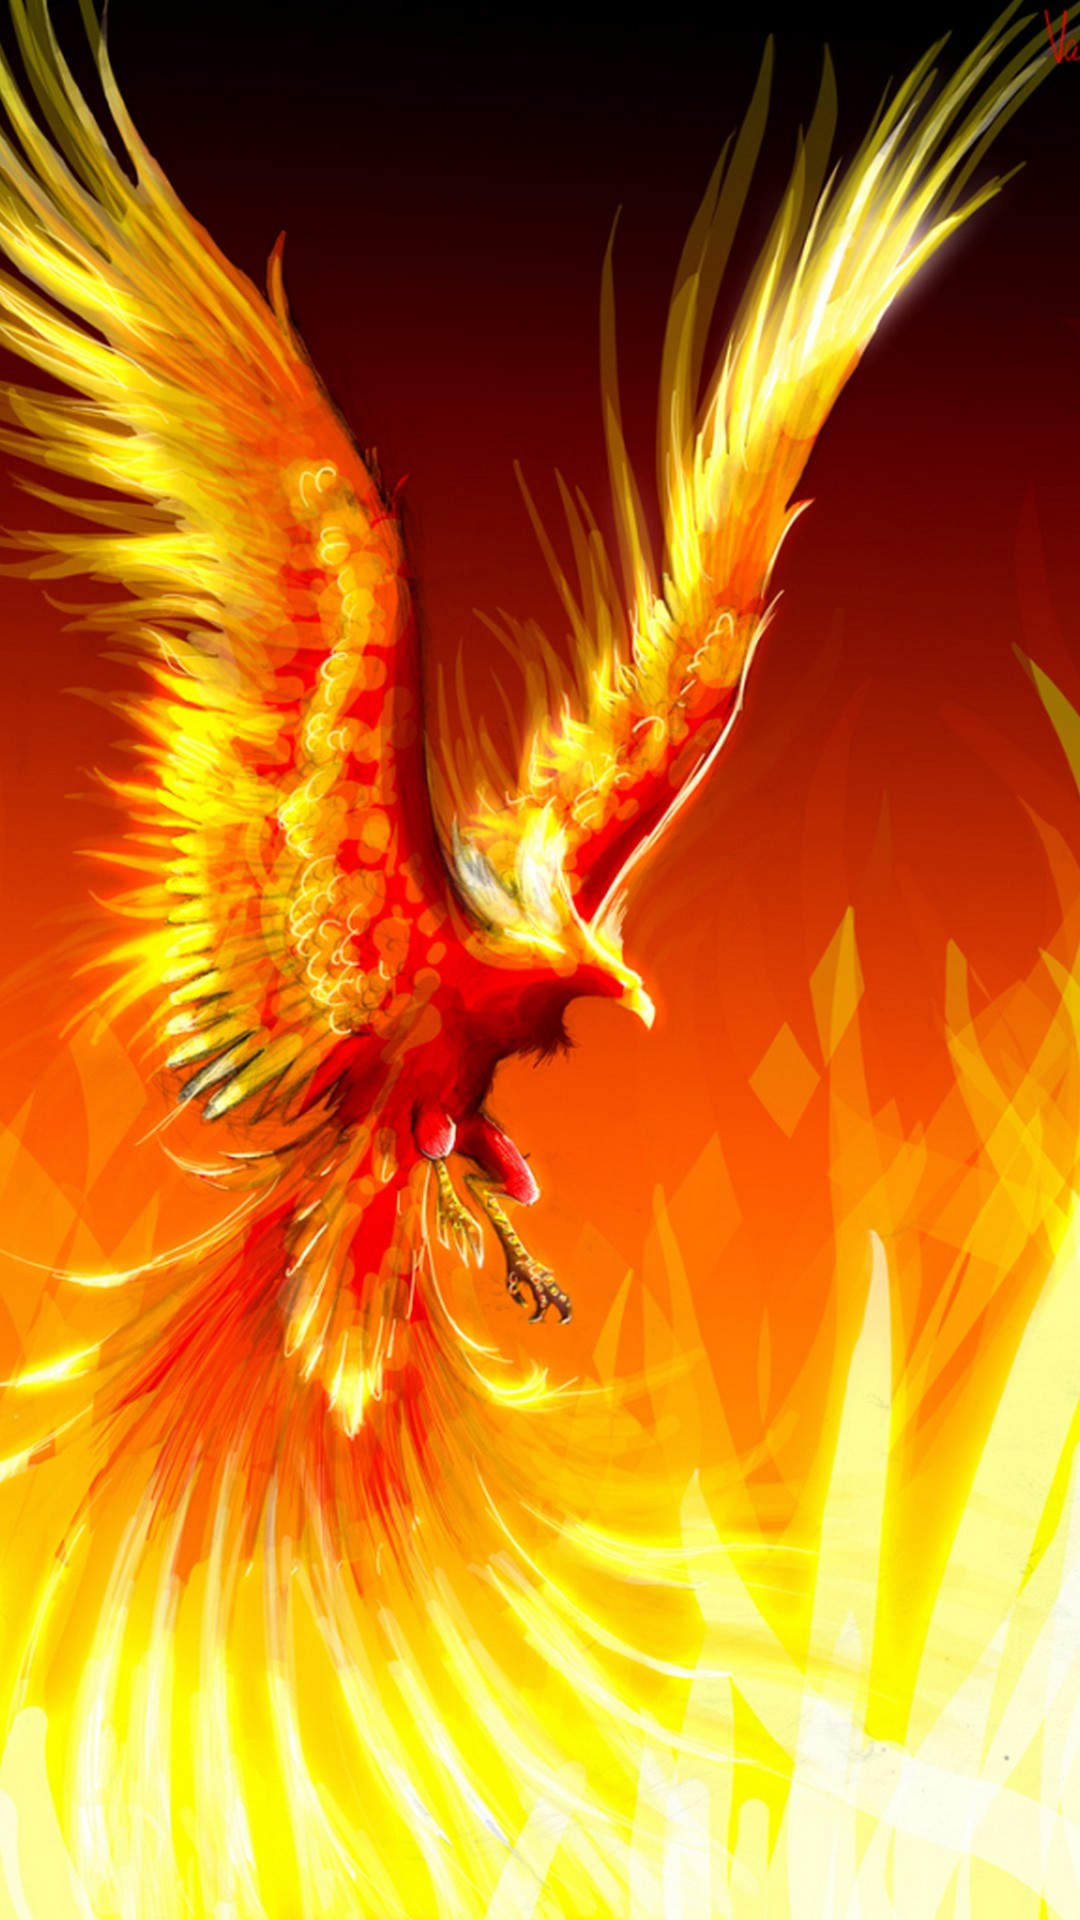 Phoenix Bird Backgrounds For Android with resolution 1080X1920 pixel. You can make this wallpaper for your Android backgrounds, Tablet, Smartphones Screensavers and Mobile Phone Lock Screen